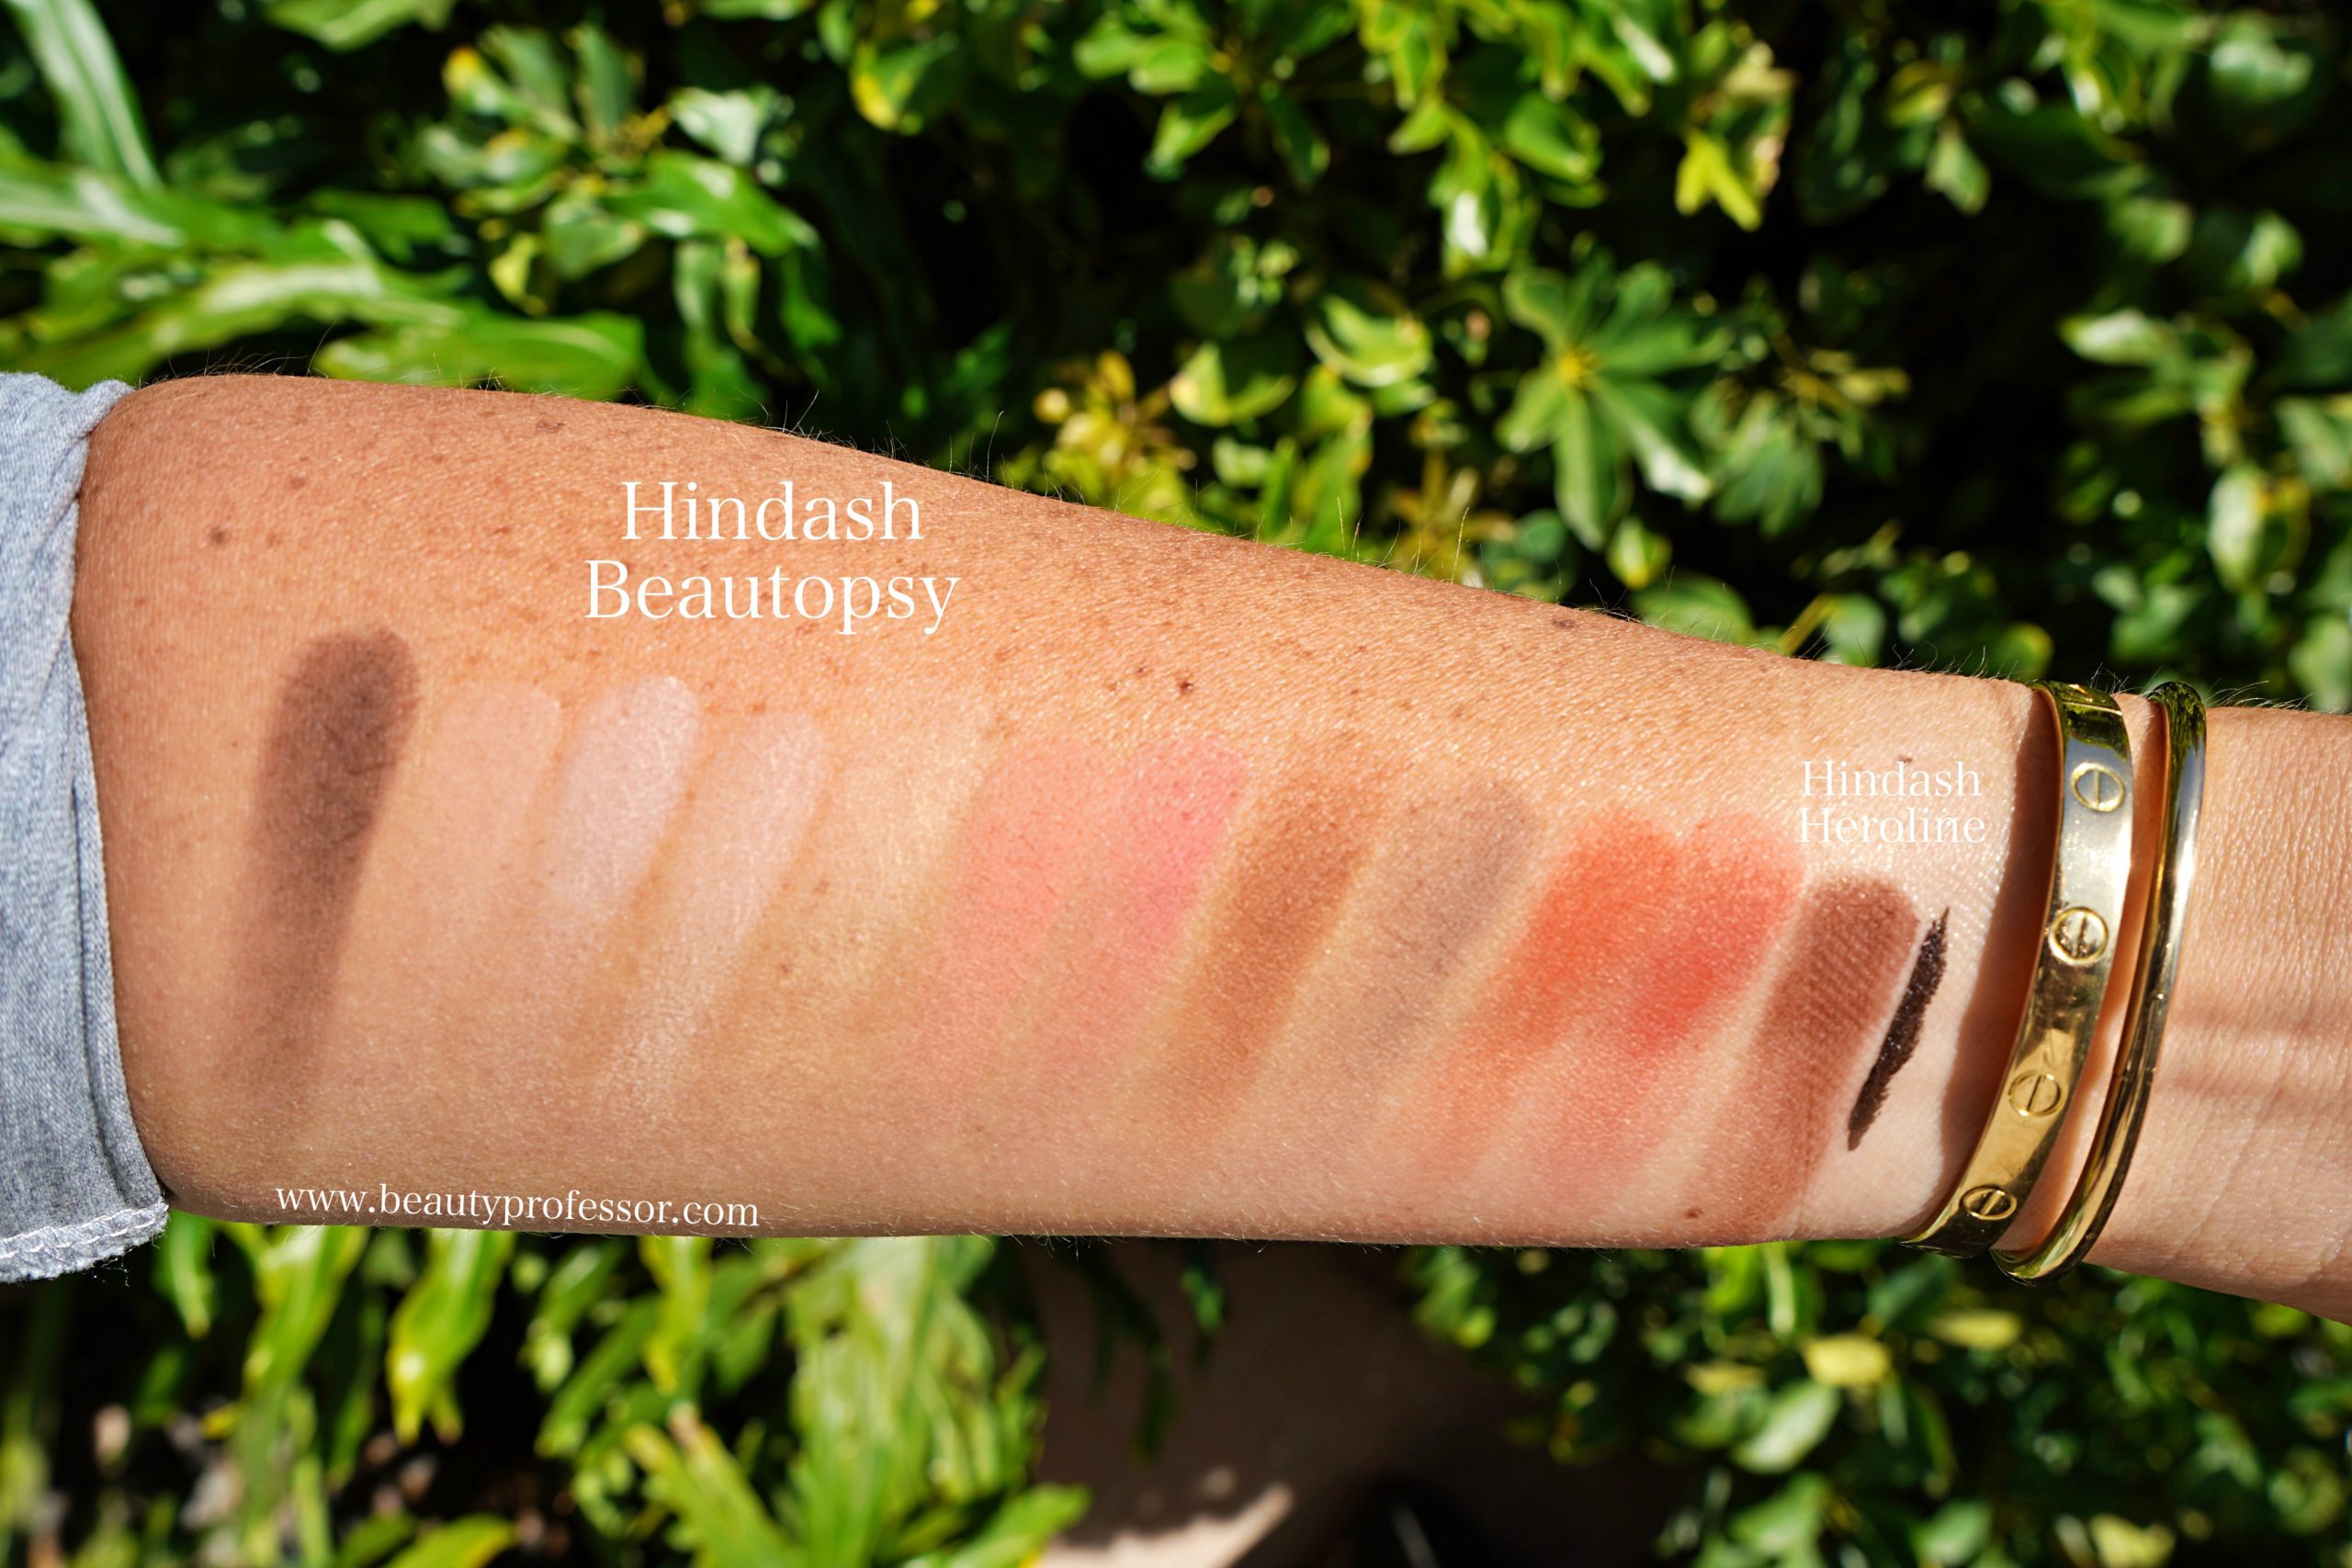 Hindash Beautopsy bundle swatches from Beautylish Gift Card Event